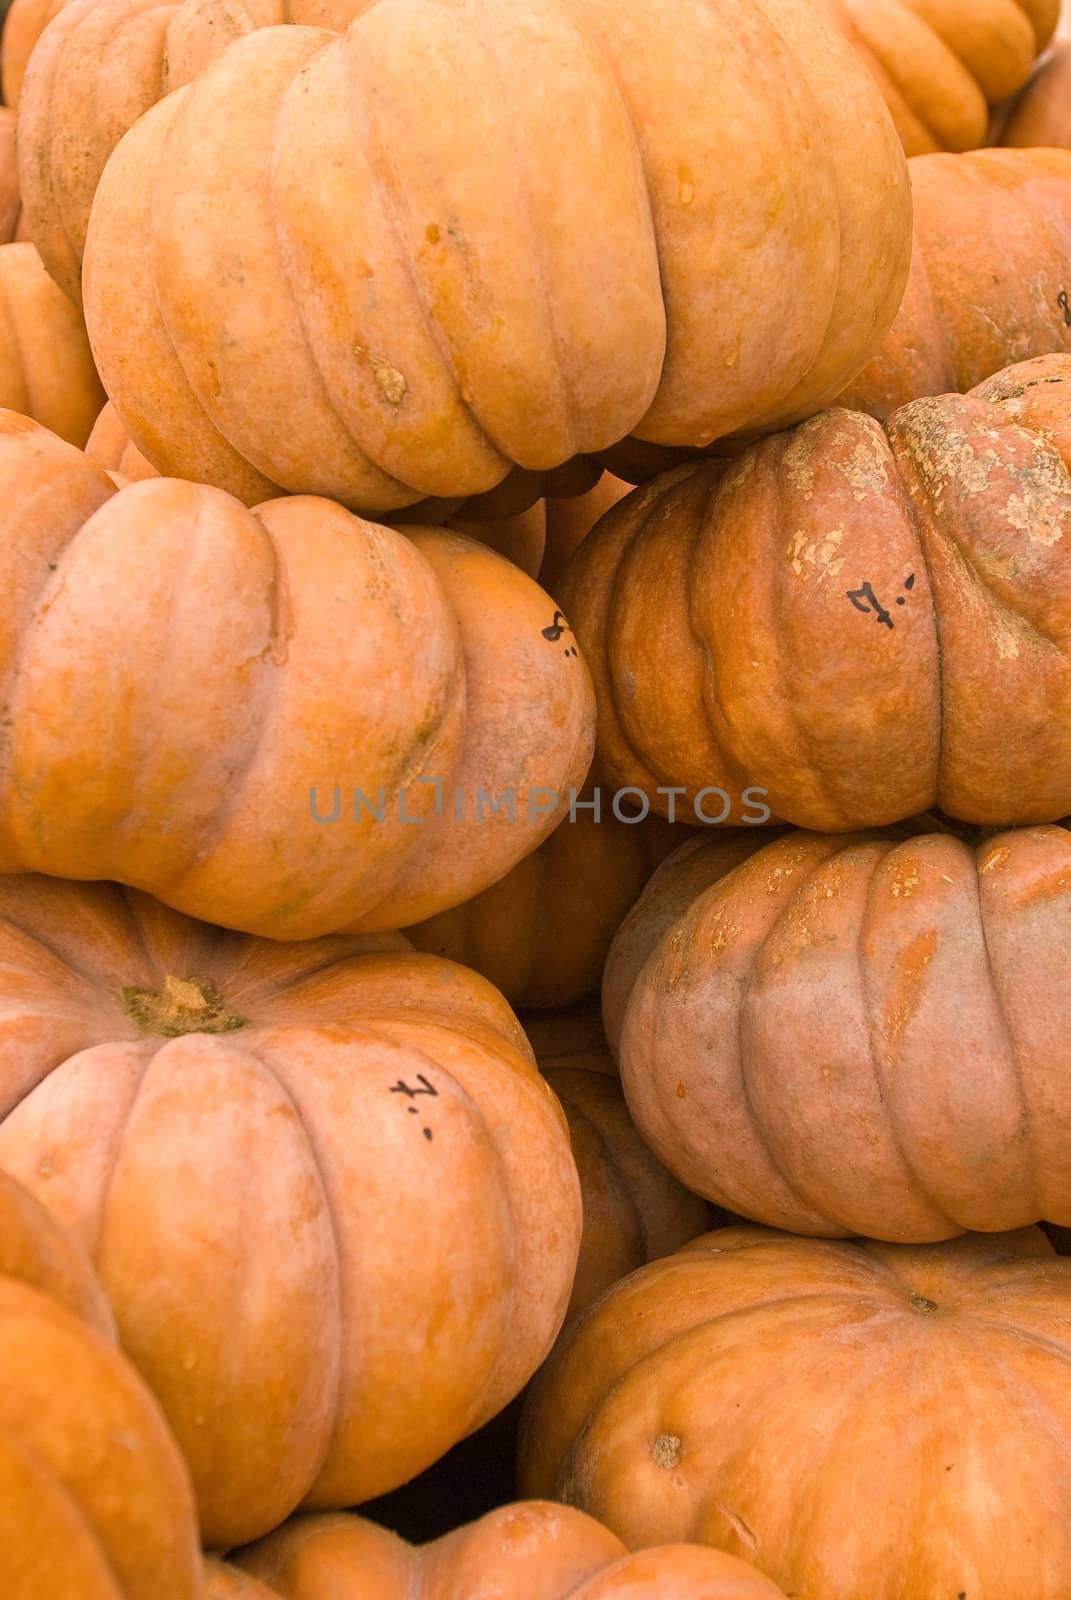 pumpkins lined up for buyers